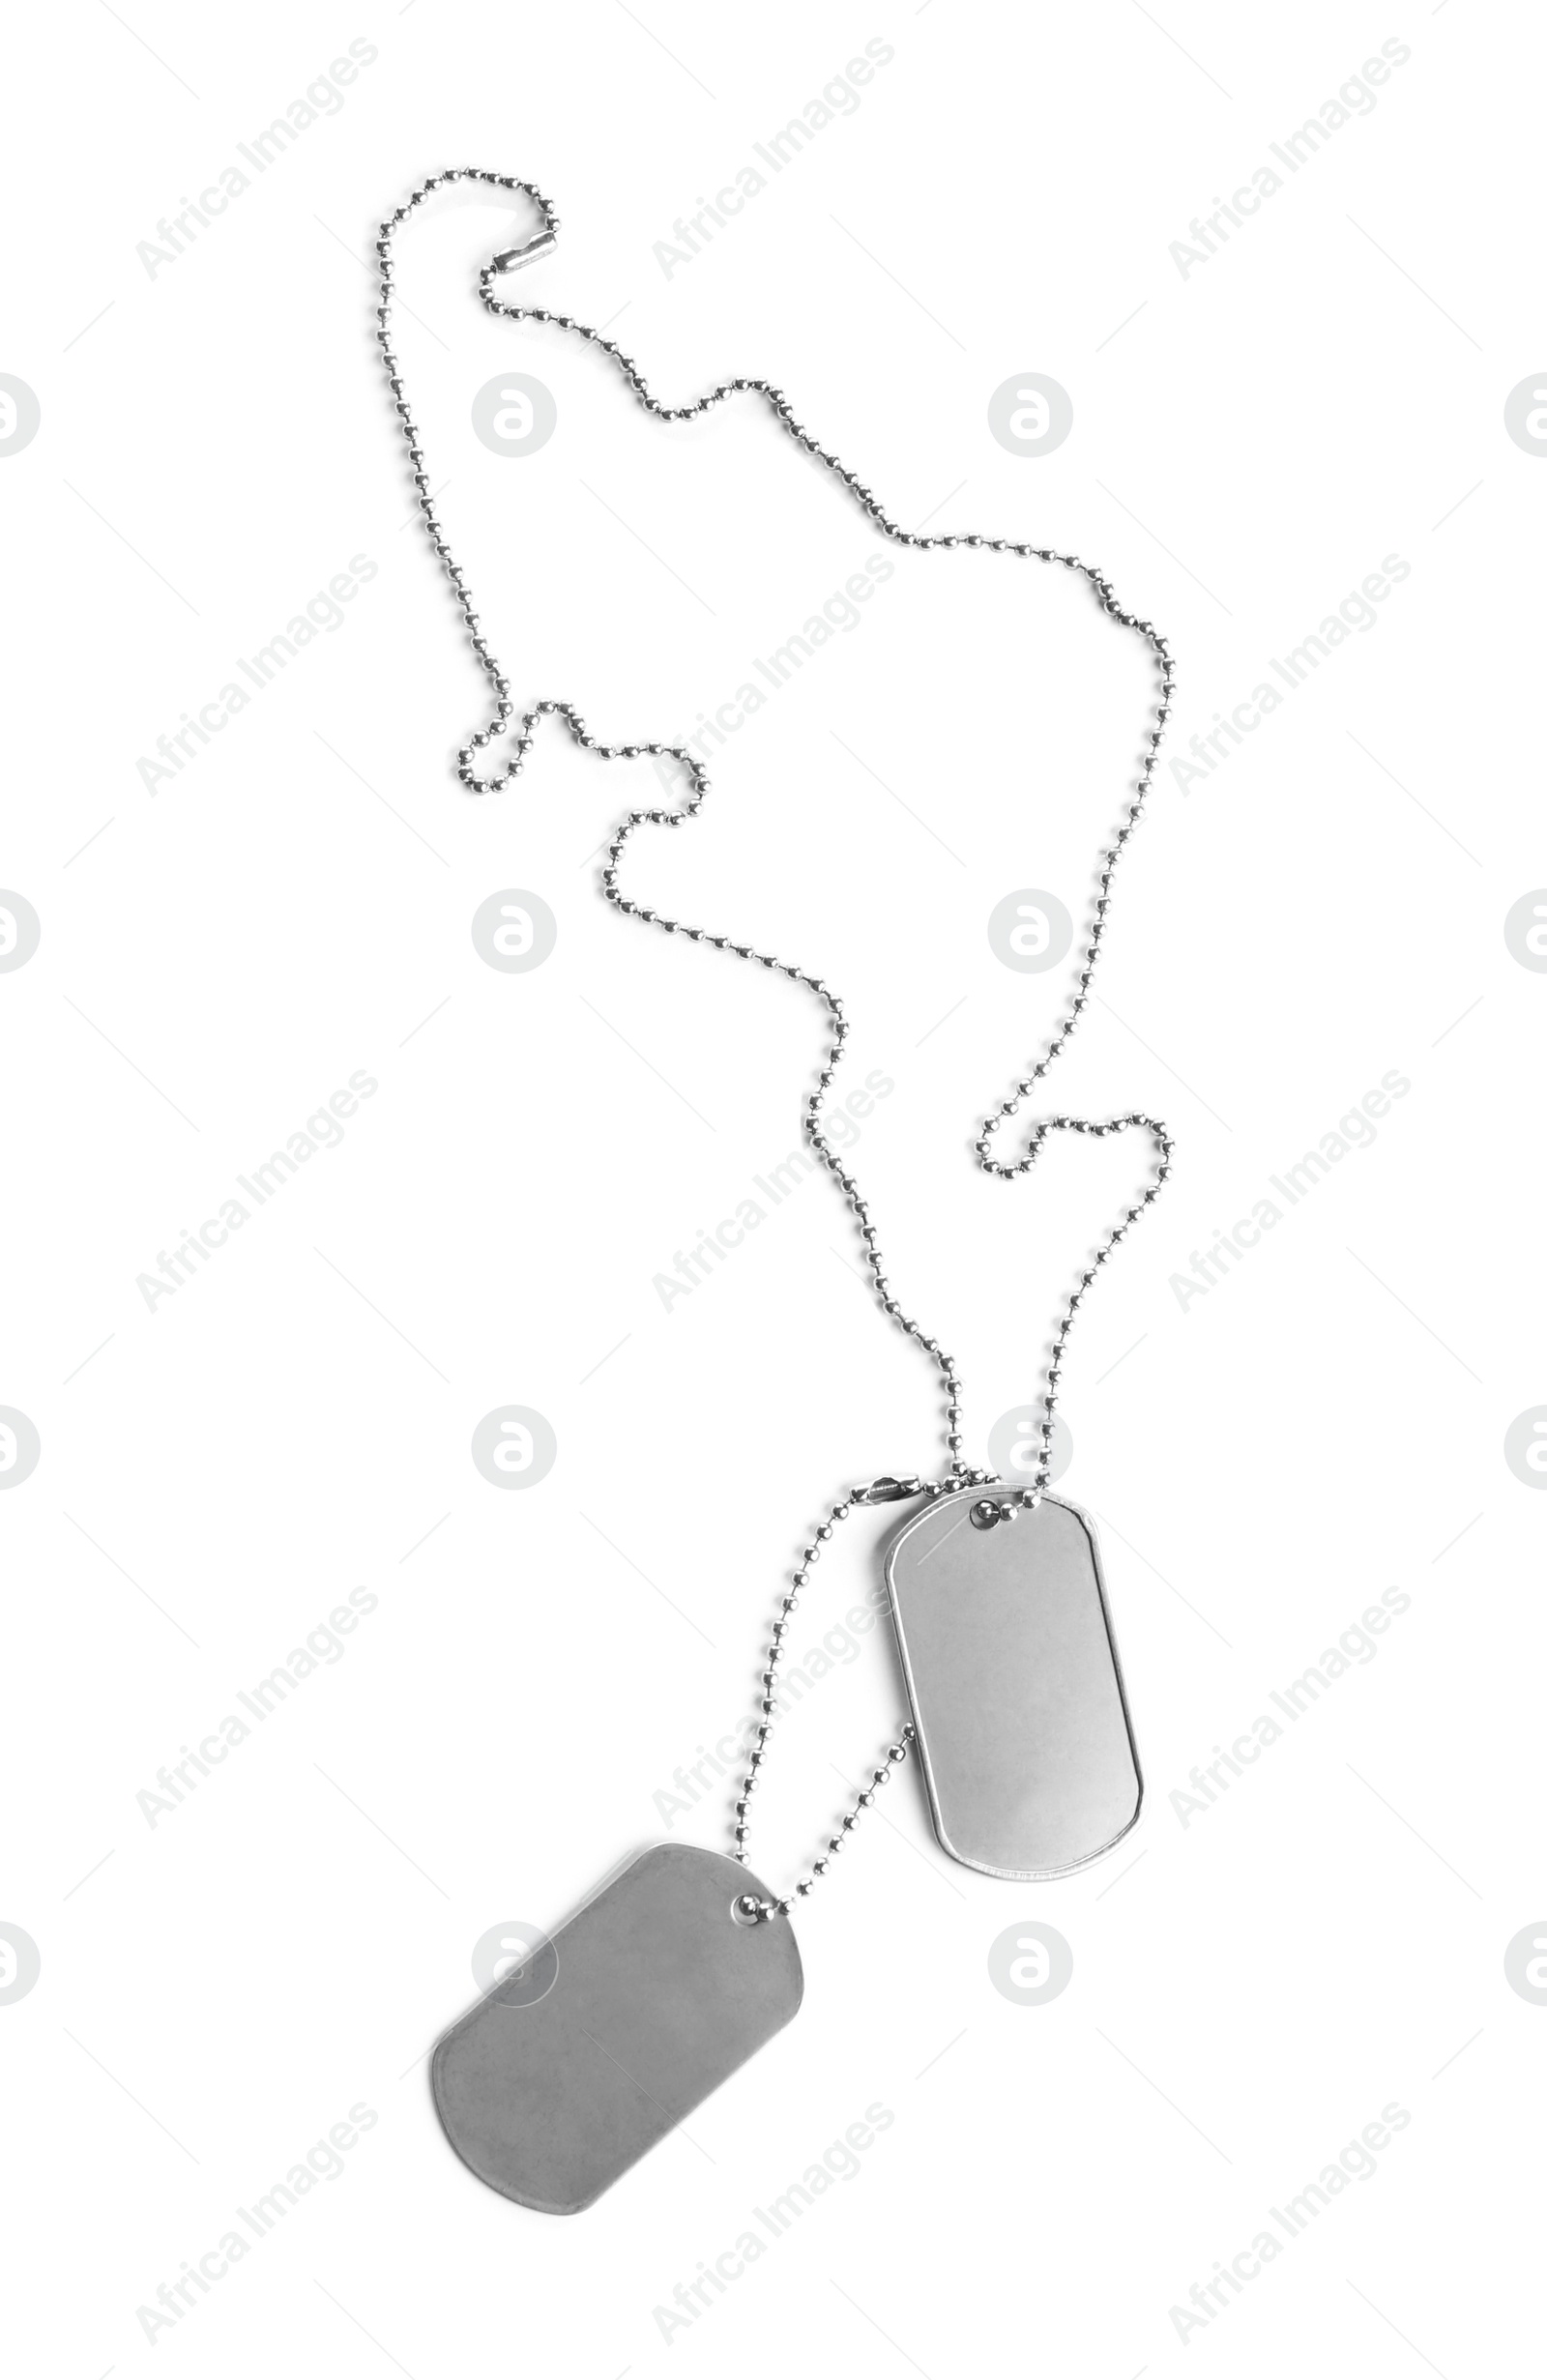 Photo of Blank military ID tags isolated on white